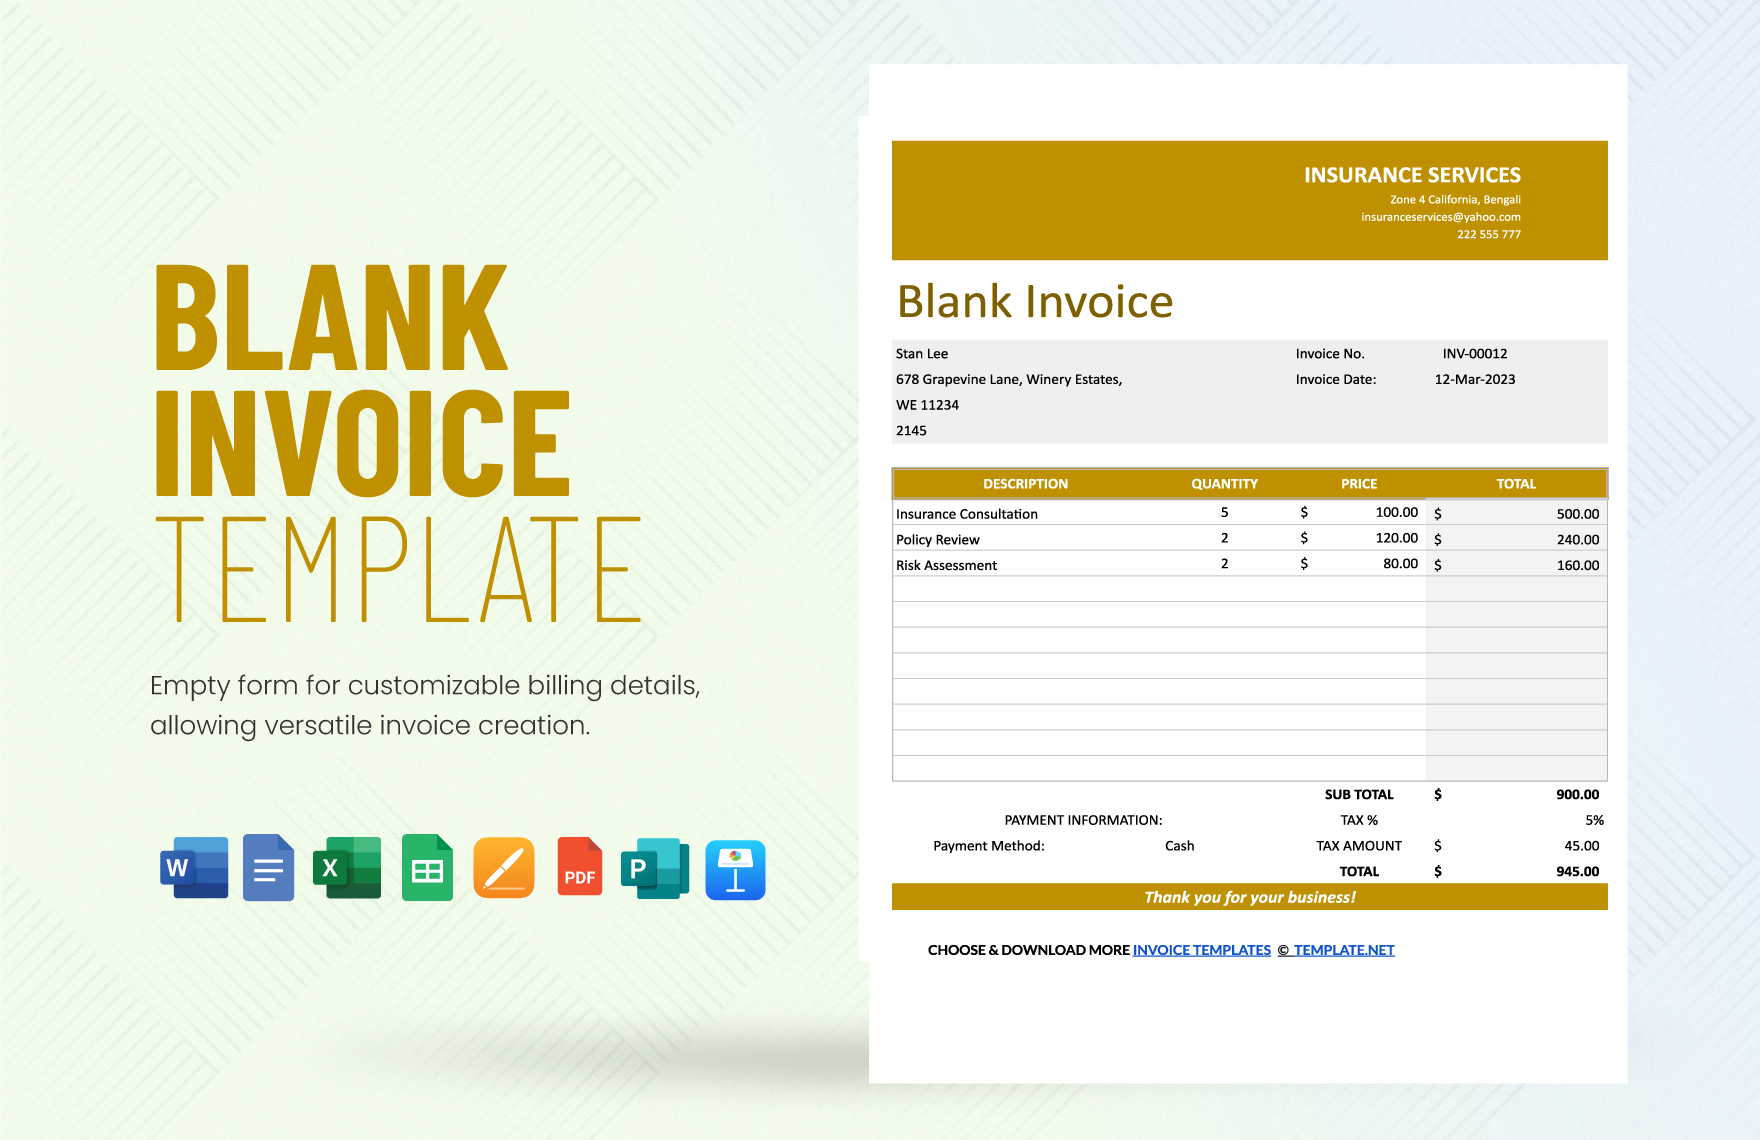 Blank Invoice Template in Word, Google Docs, Excel, PDF, Google Sheets, Apple Pages, Publisher, Apple Numbers, Apple Keynote